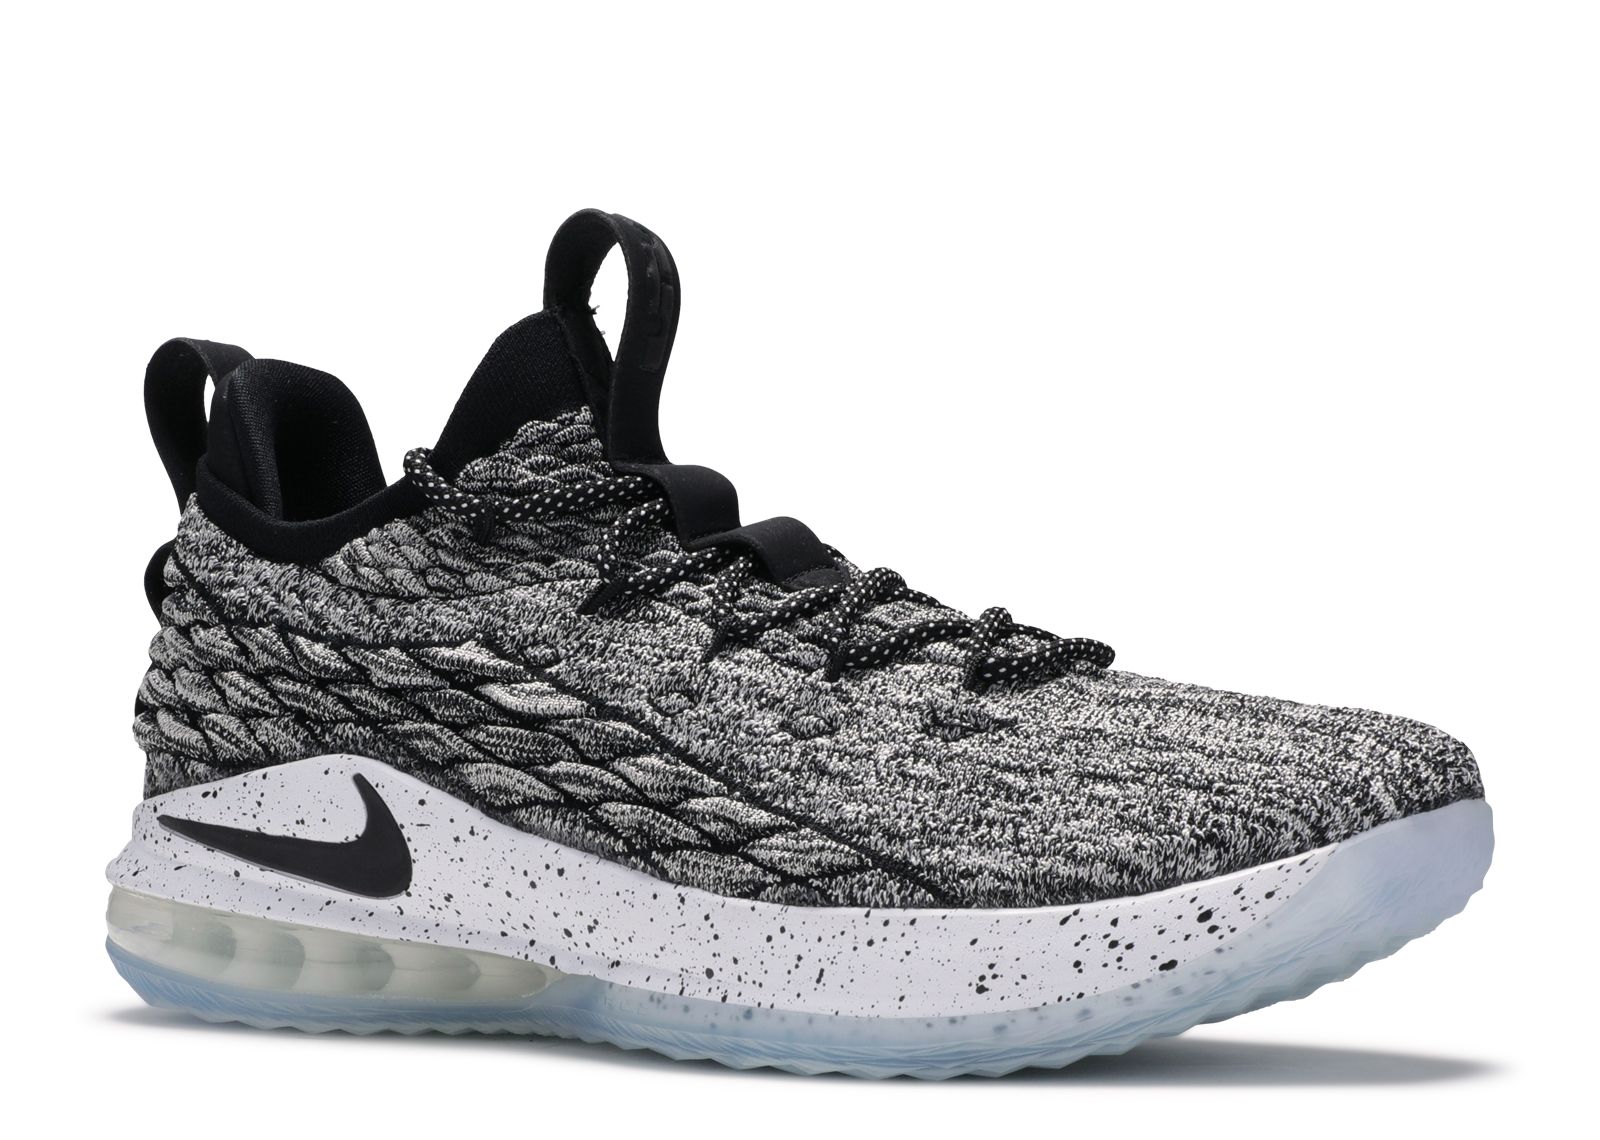 lebron 15 low black and white